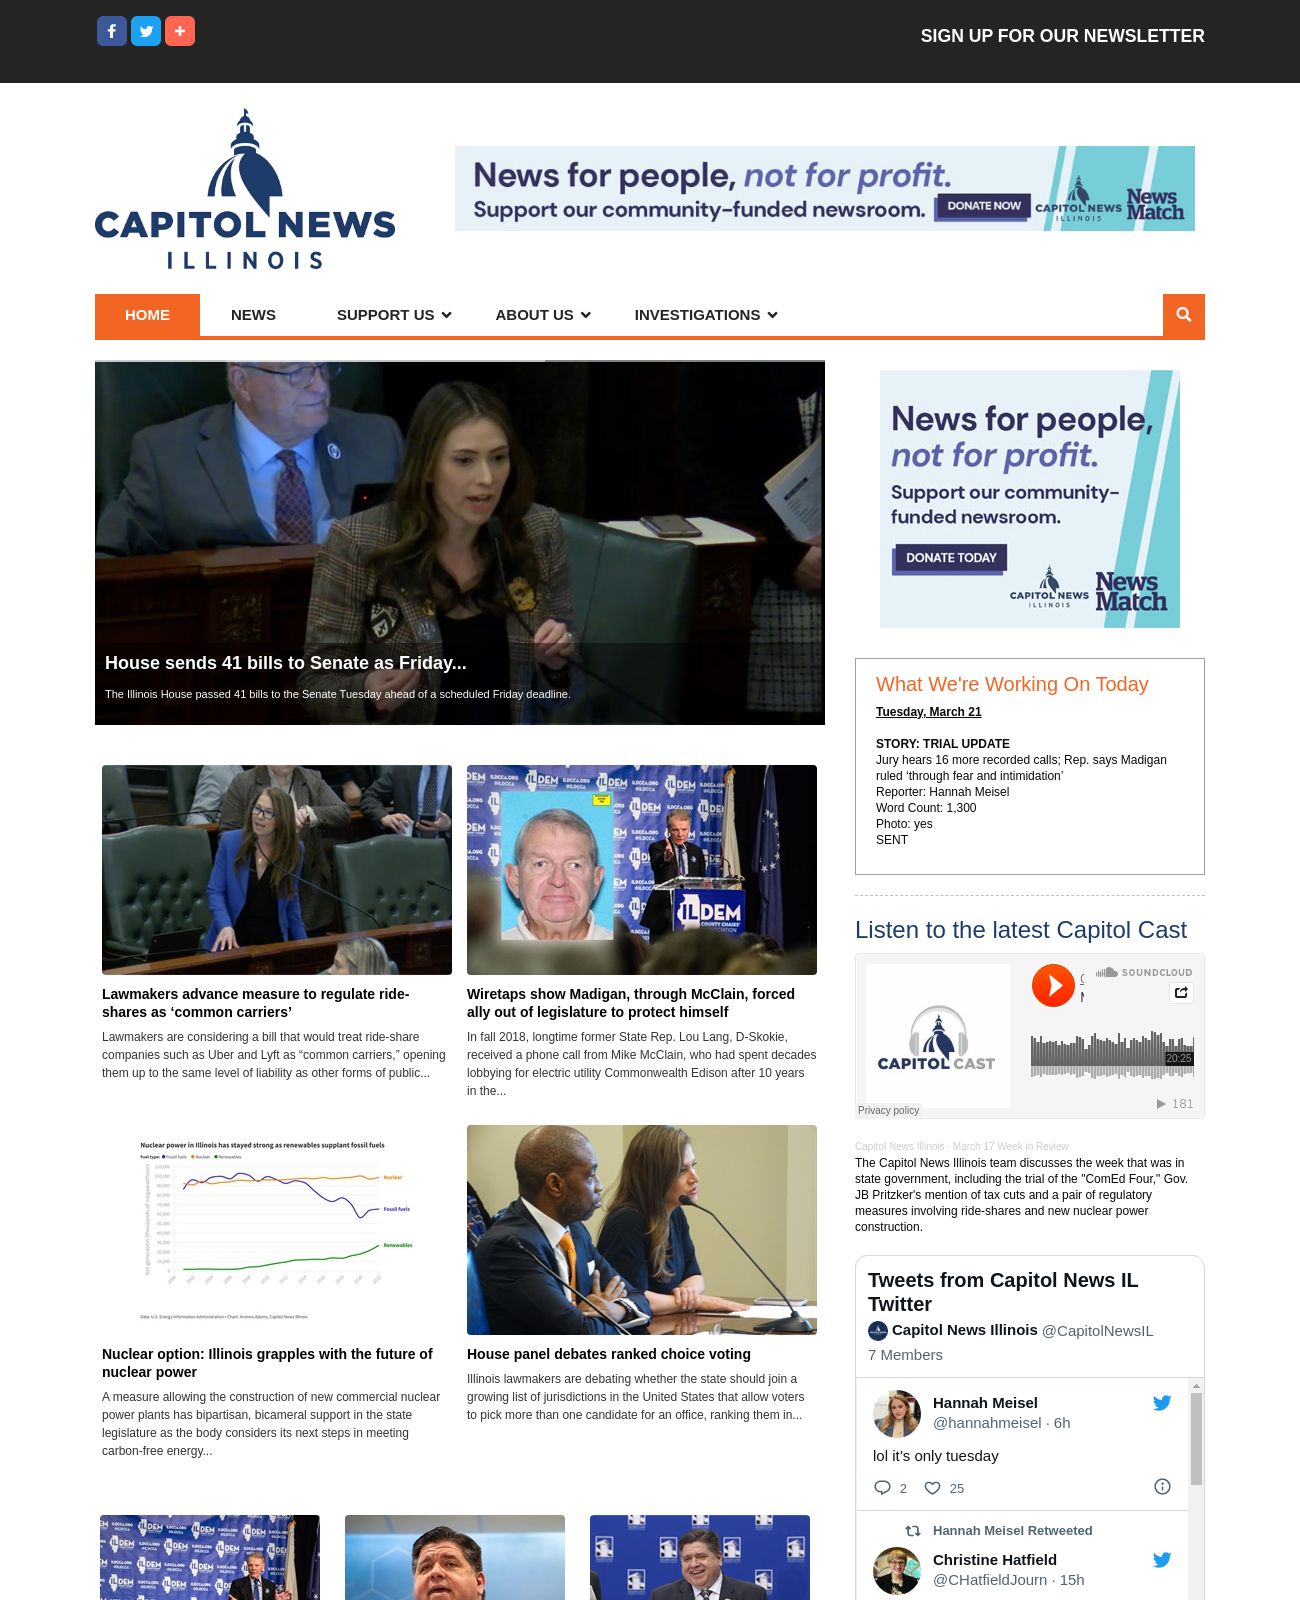 Capitol News Illinois at 2023-03-22 05:27:30-05:00 local time